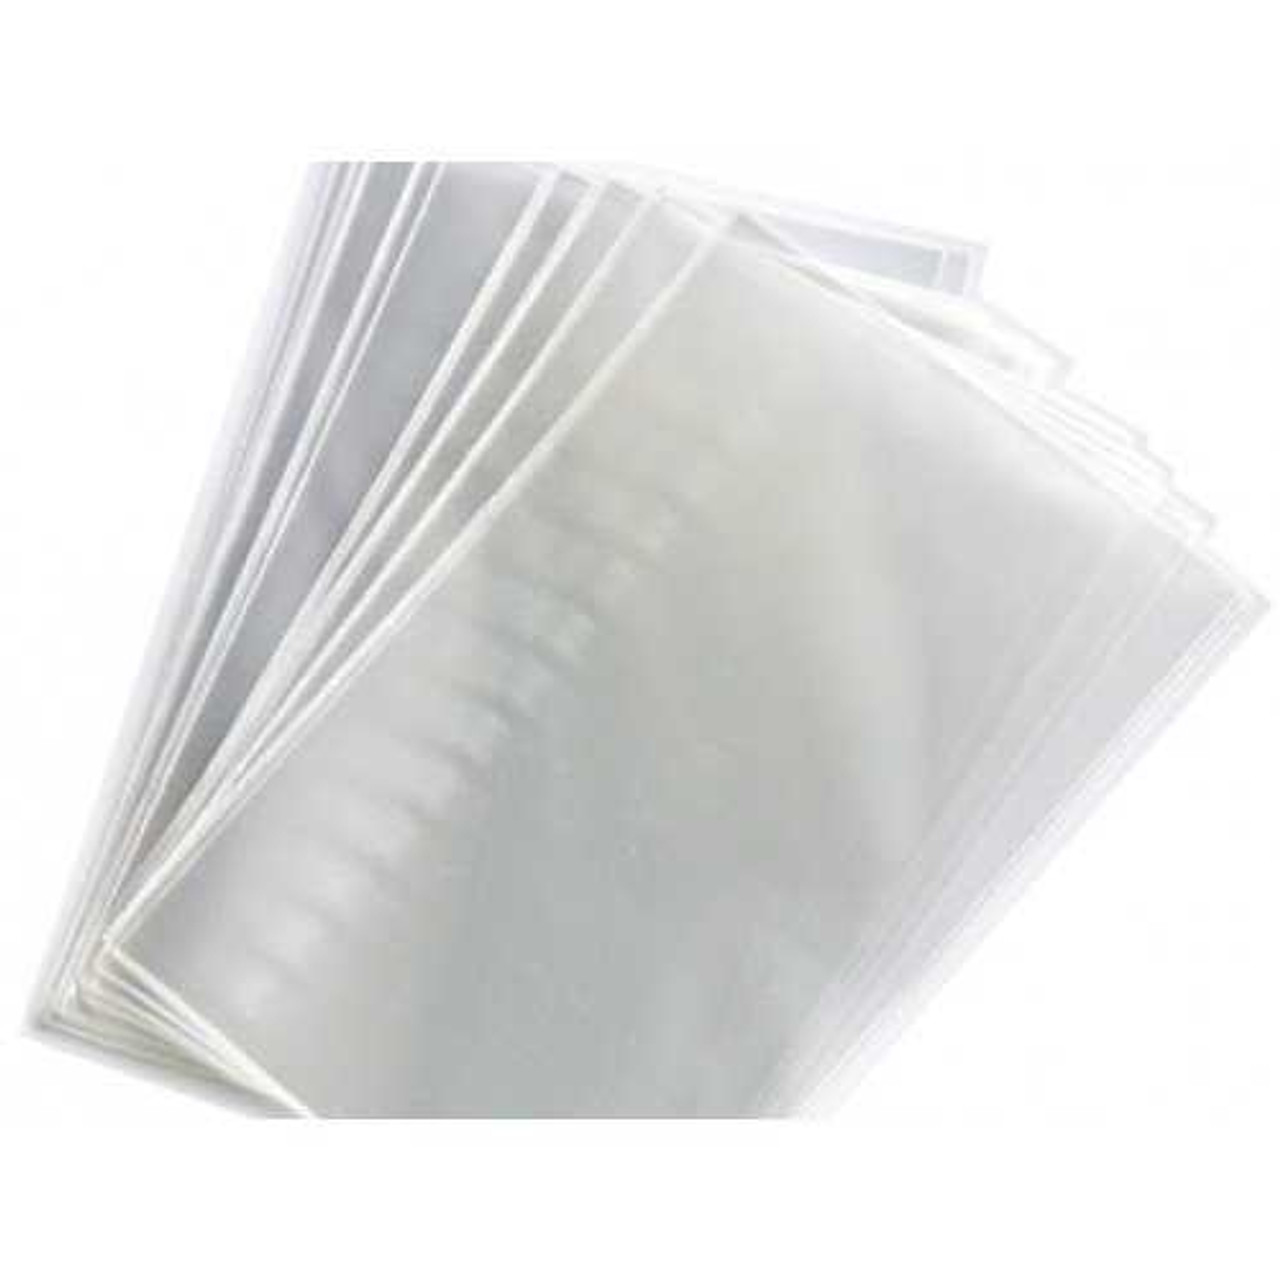 Clear Heat Seal Bags - 3 x 4 Flat - Set of 100 Bags